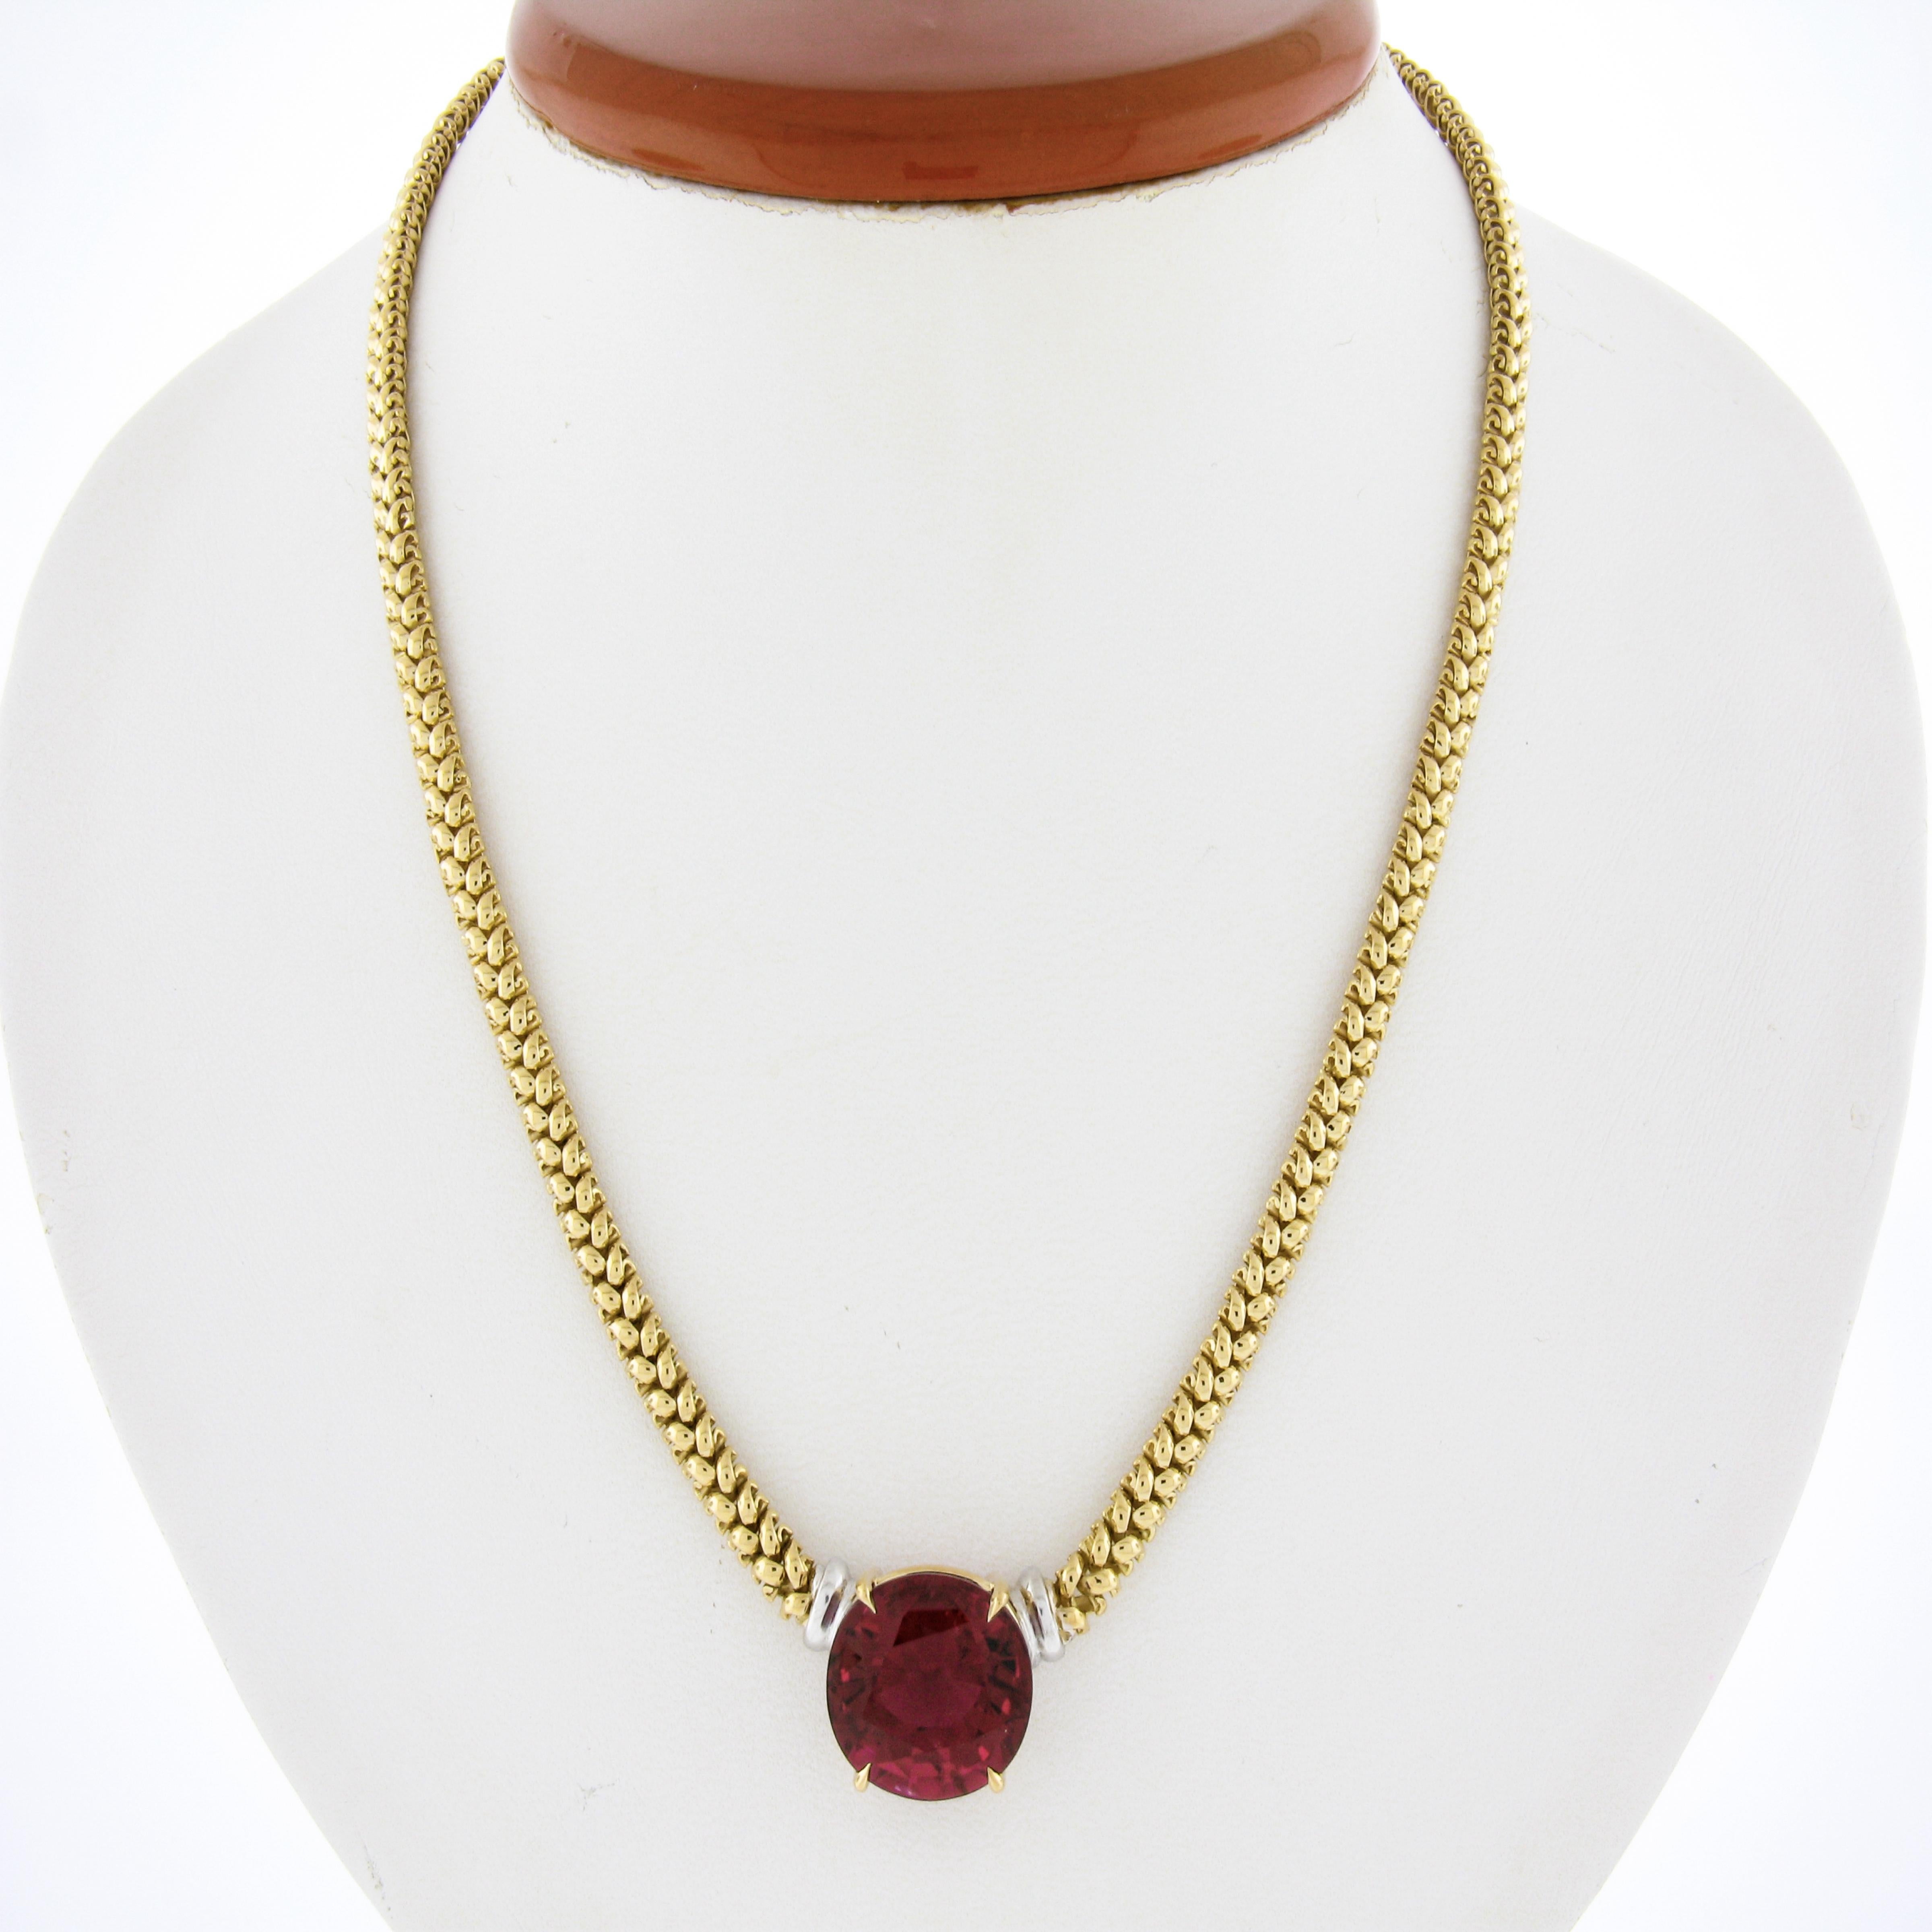 An estate statement solitaire pendant necklace that was crafted from solid 18k yellow gold. The necklace features a large, GIA certified oval shape rubellite tourmaline. It displays the finest and most mesmerizing raspberry red color that is